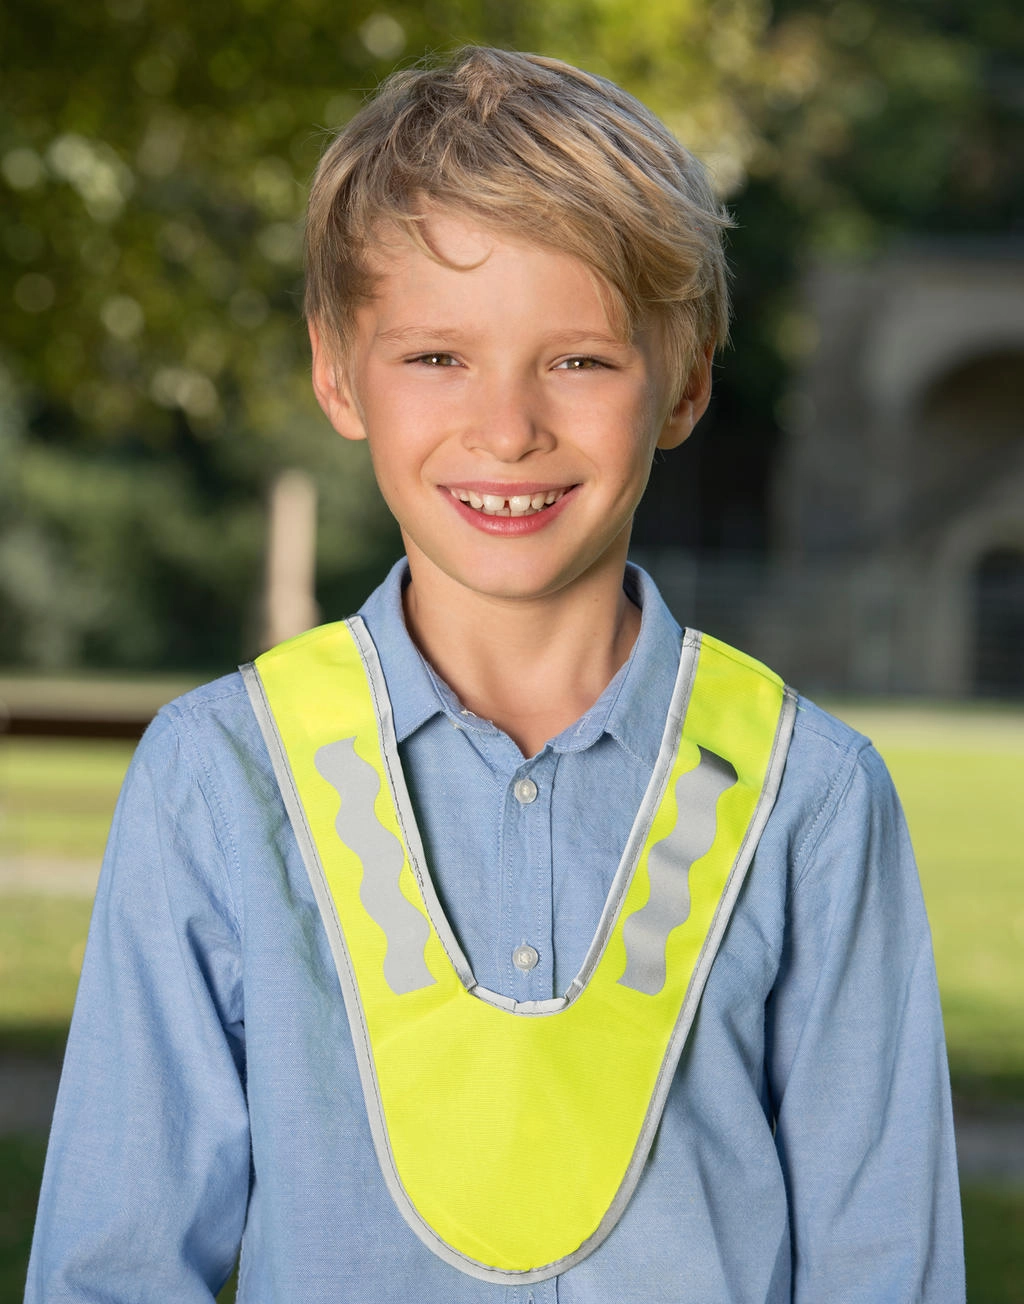 Safety Collar for Kids 